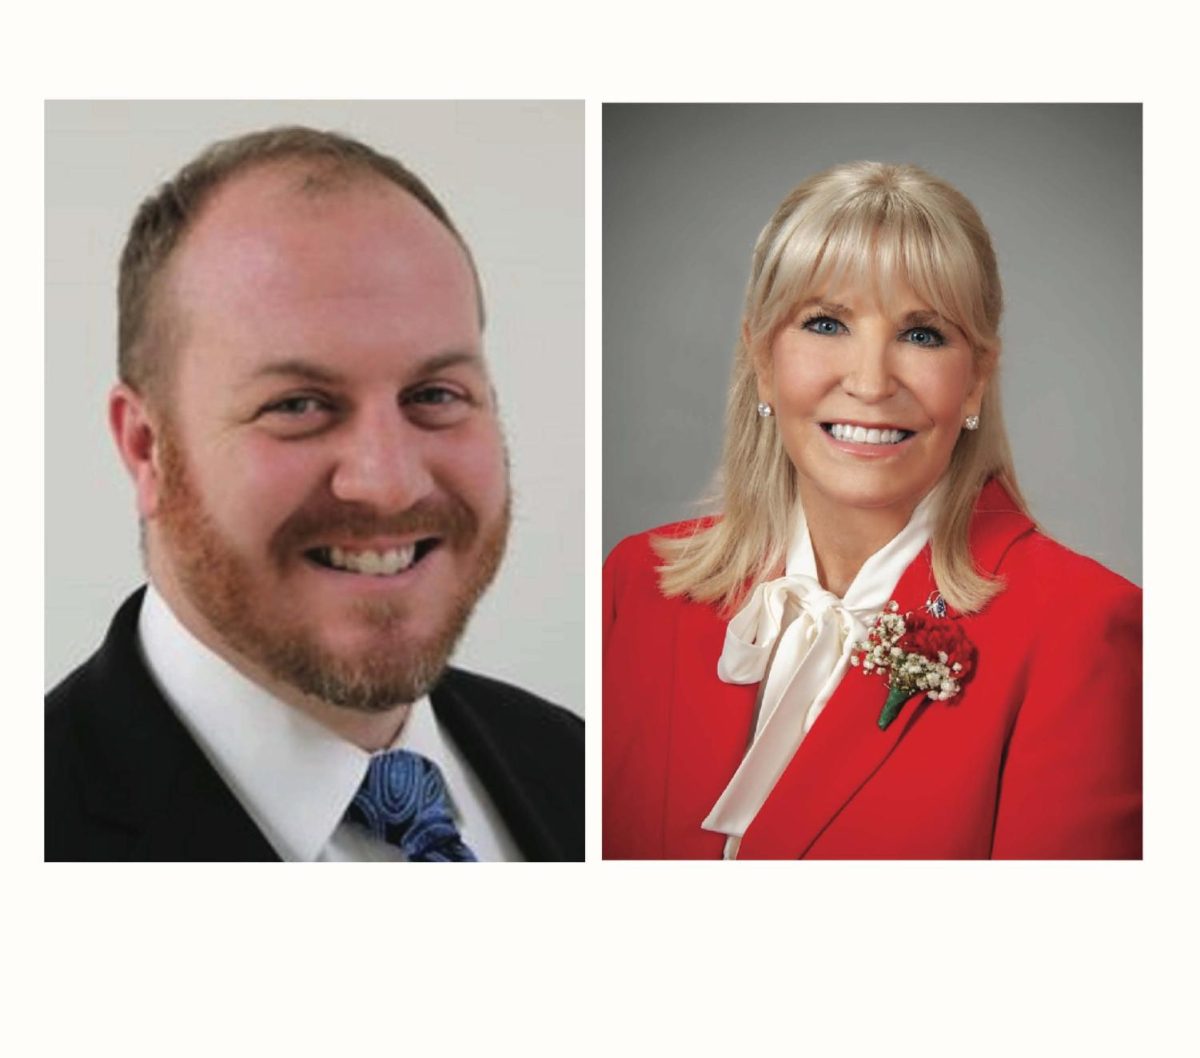 Cody Harper, left and Sarah Carruthers, right, are running for the Republican Party nomination for the  Ohio House 47th District.